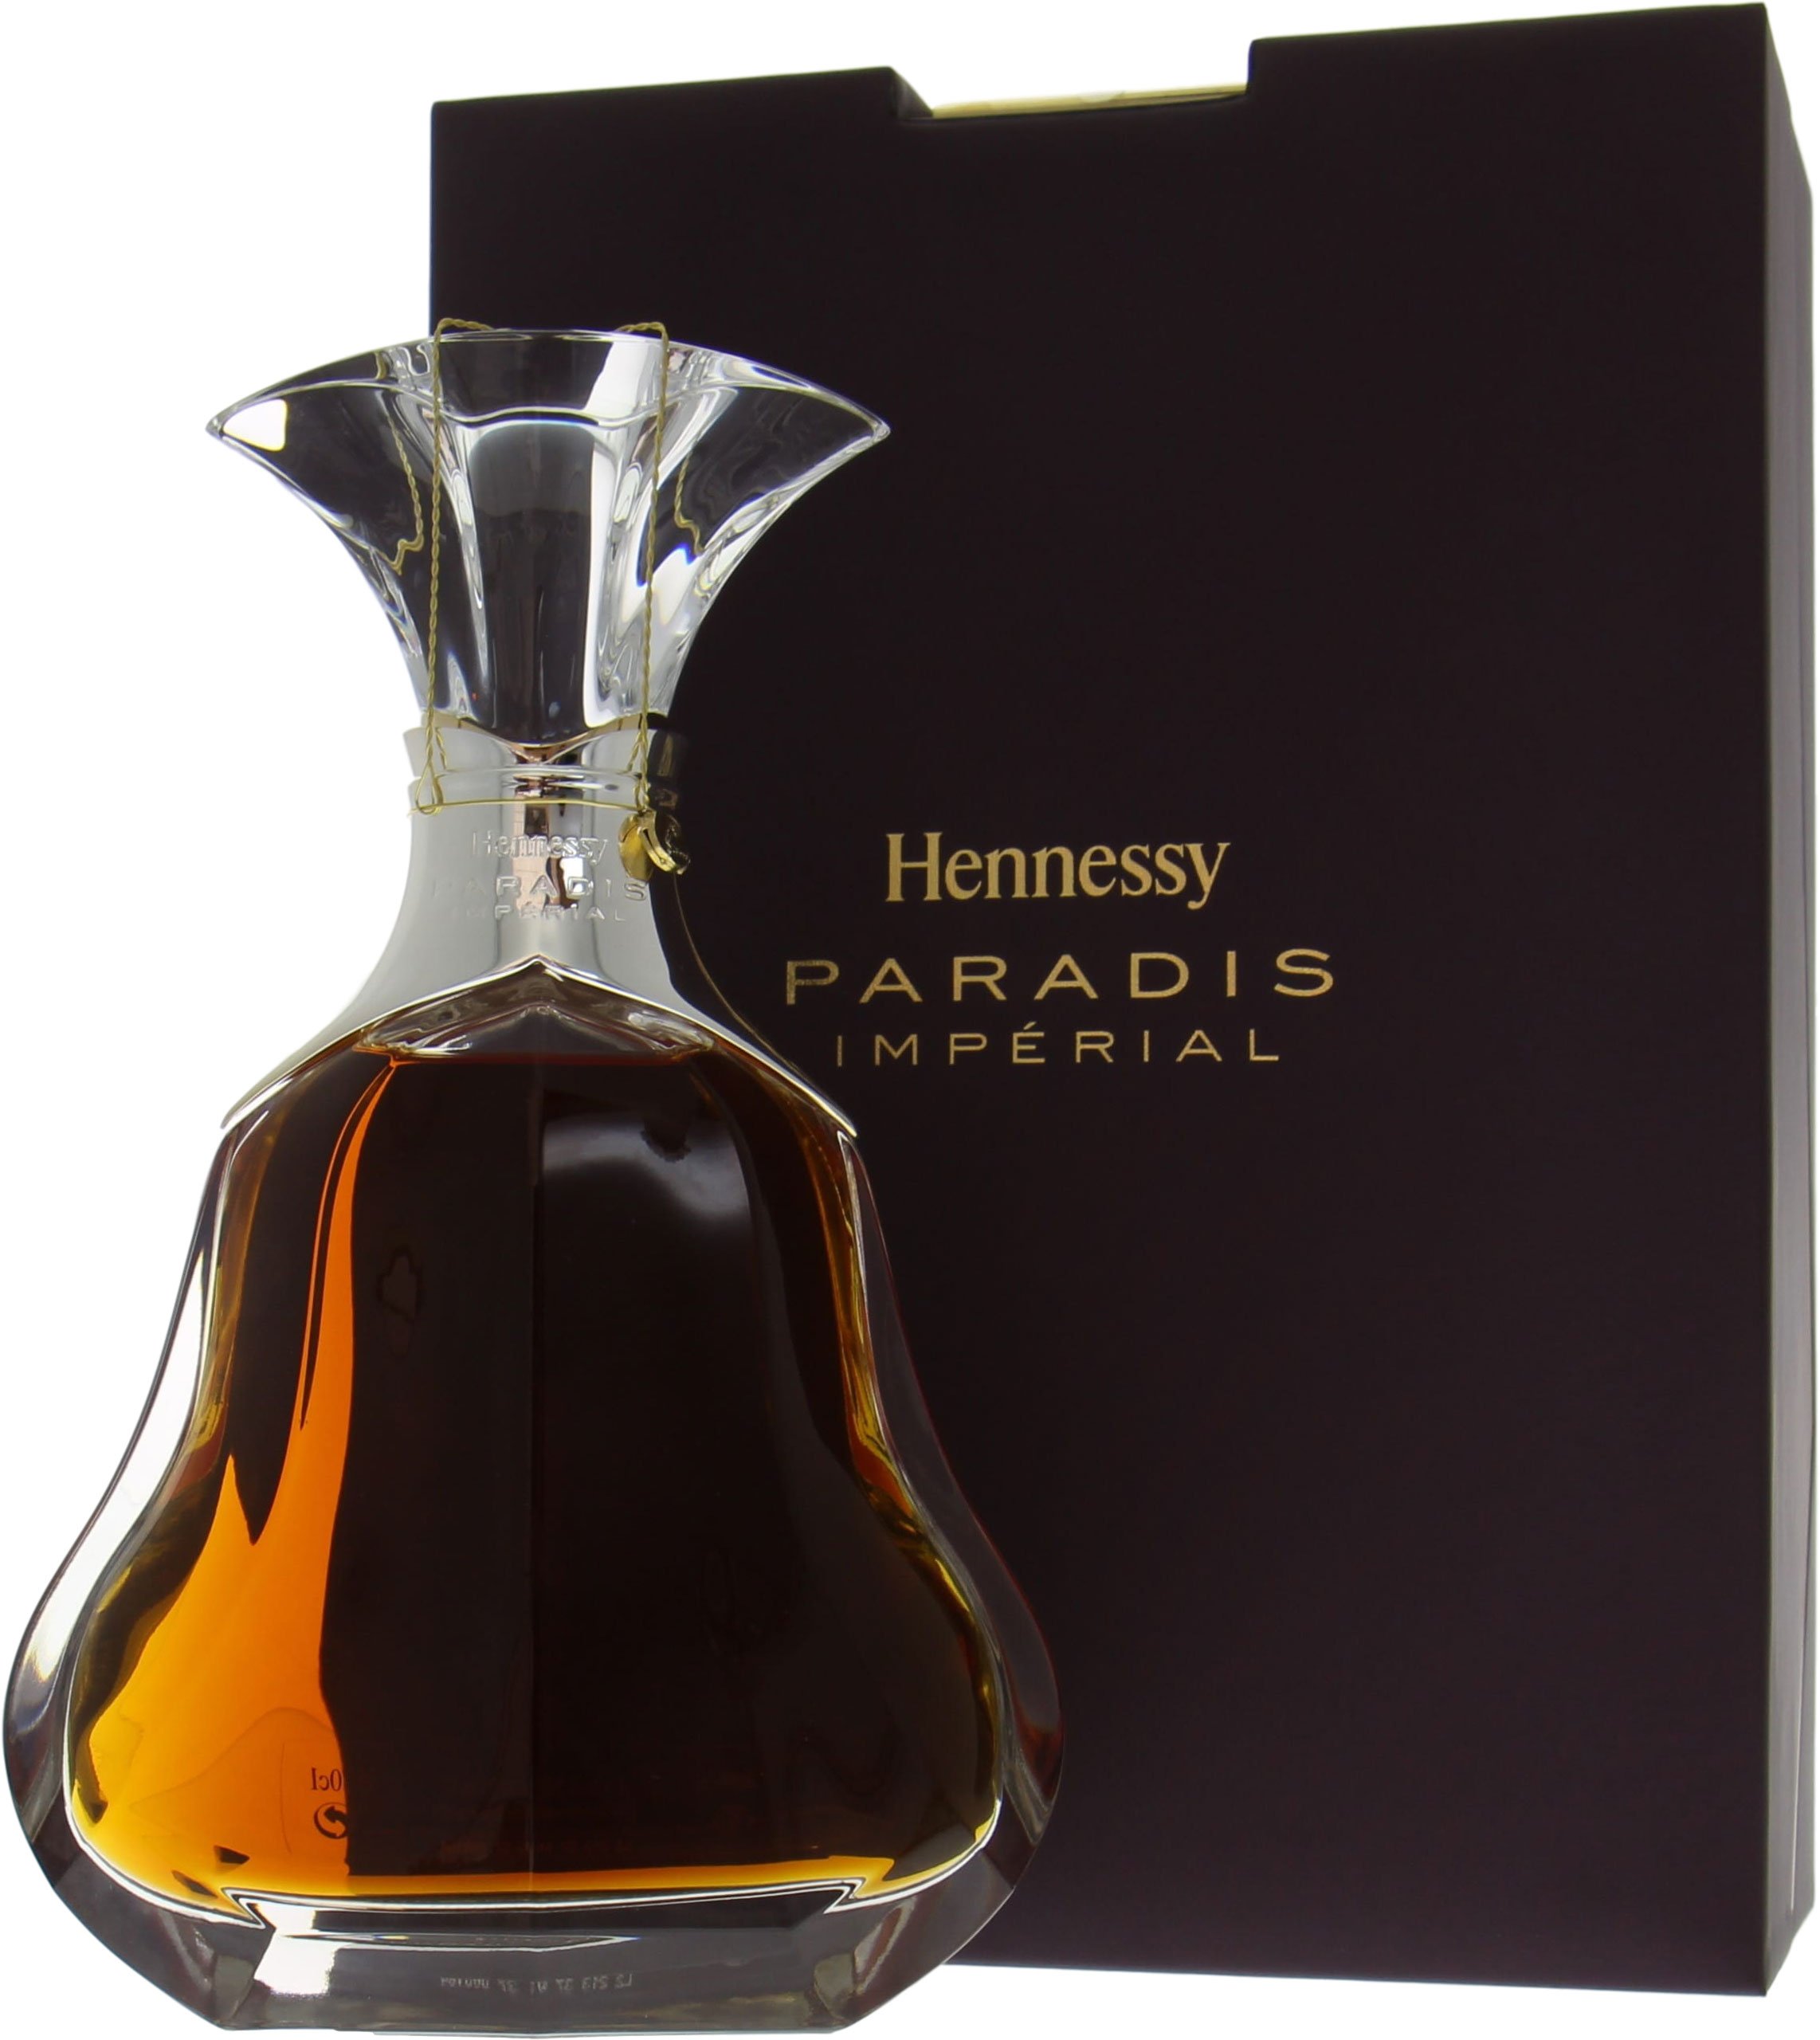 Hennessy Paradis Imperial NV (0.7 l.); | Buy Online | Best of Wines